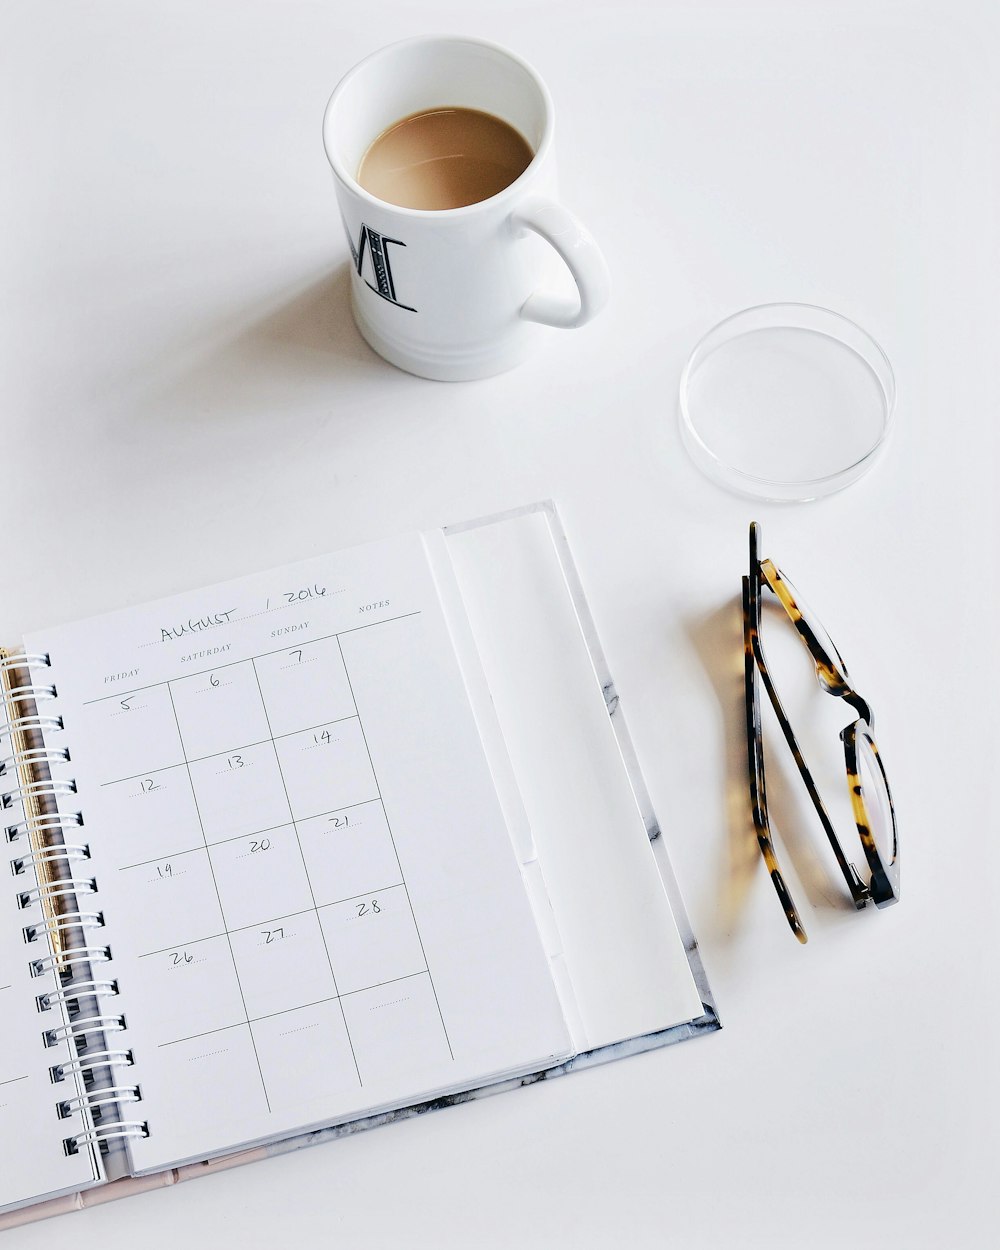 A calendar book, pair of glasses and cup of coffee on a white surface.